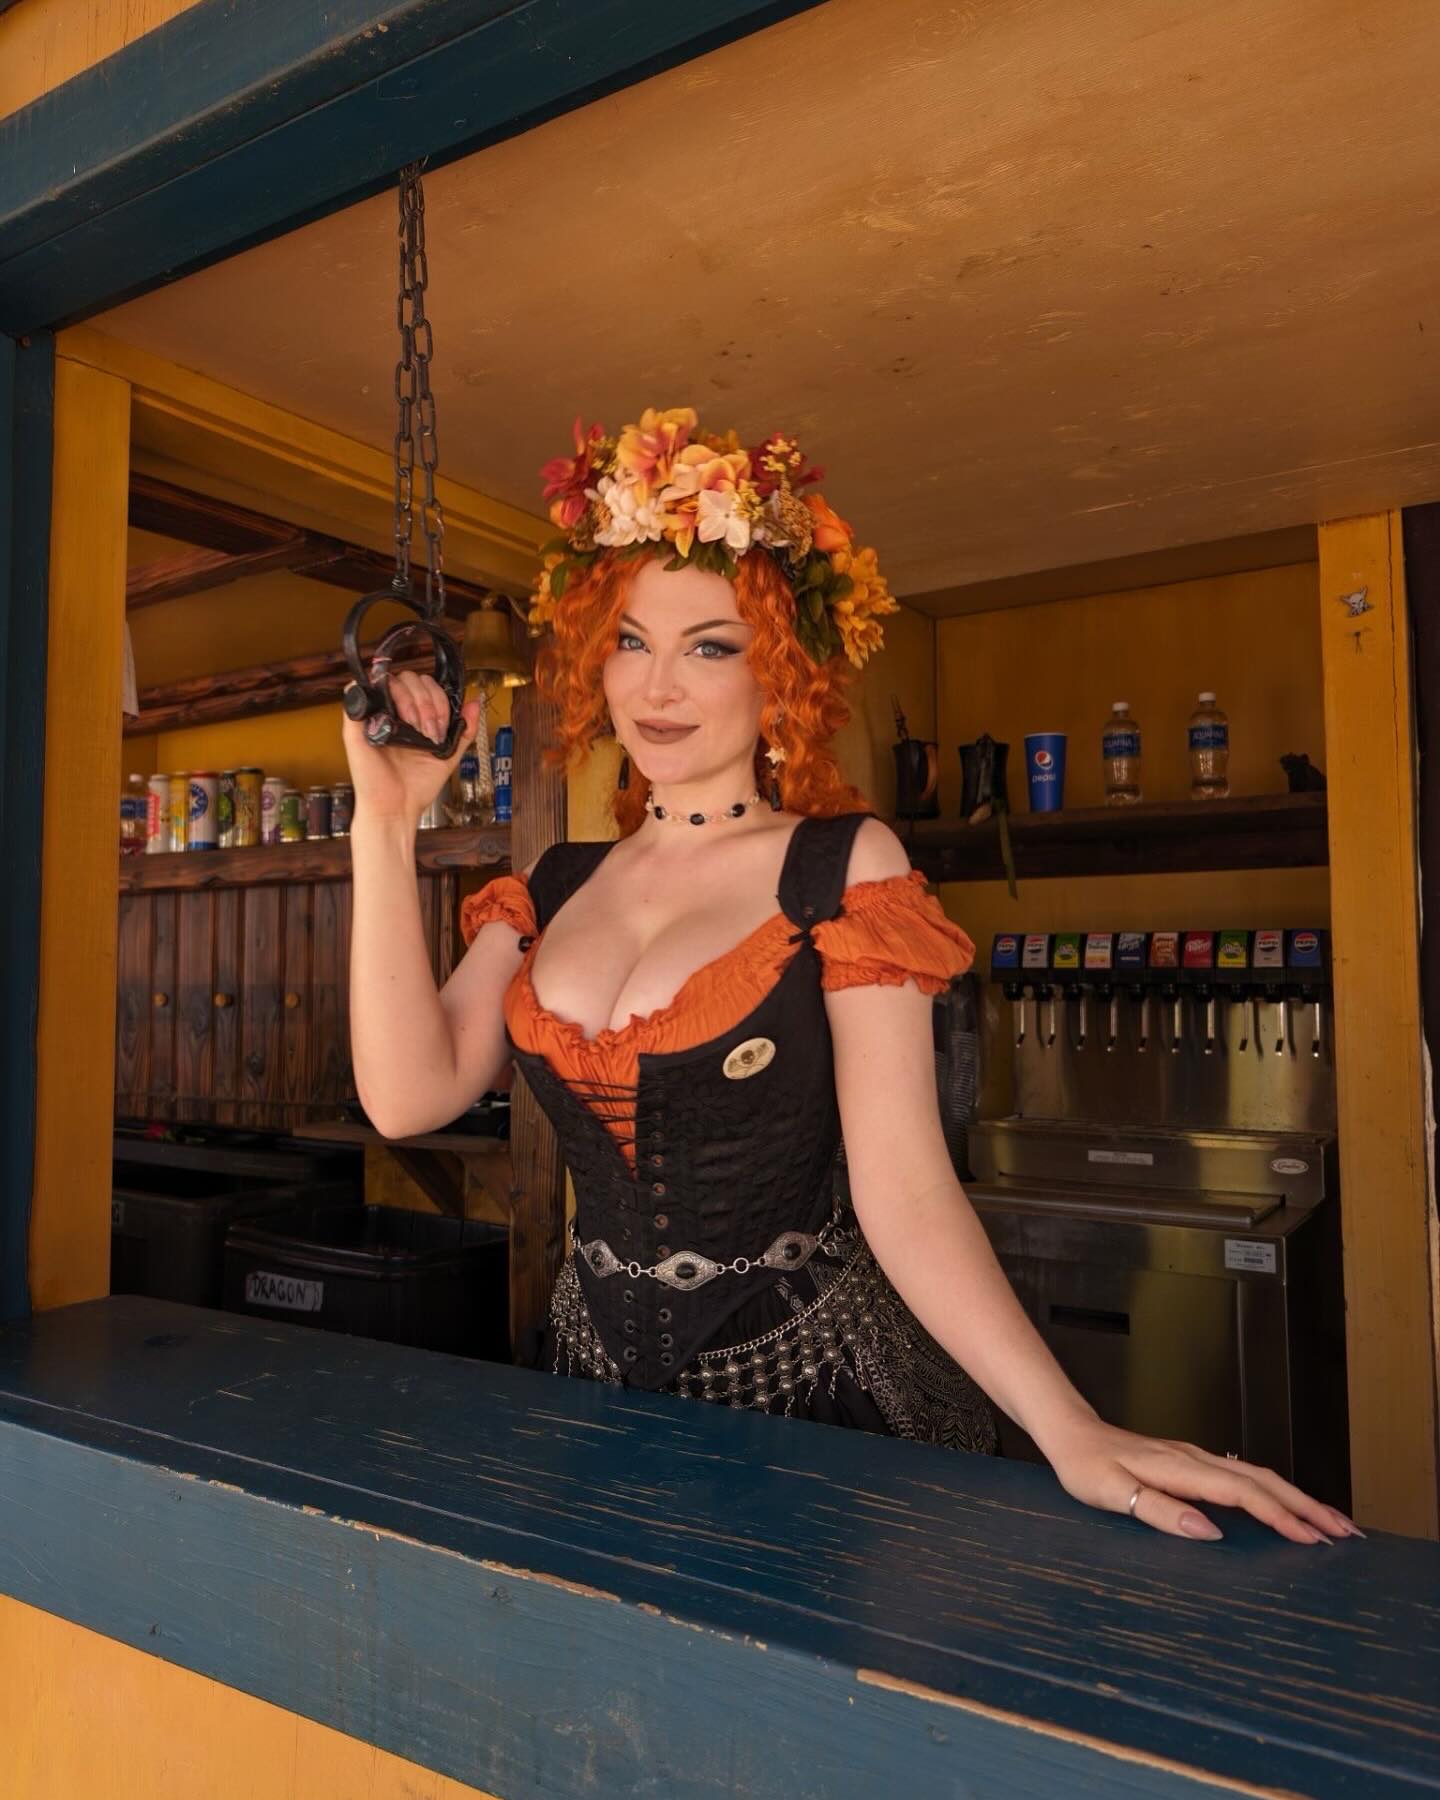 @renaissancepleasurefaire opening weekend was a blast! It was so much fun spending the weekend working at The Oubliette and pouring drinks for all you beautiful degenerates! Come by and see me there throughout the season! 

Photos day one by @happytriggerla 
Garb made by me

#renaissancefaire #renaissancefestival #renfaire #renaissancepleasurefaire #wench